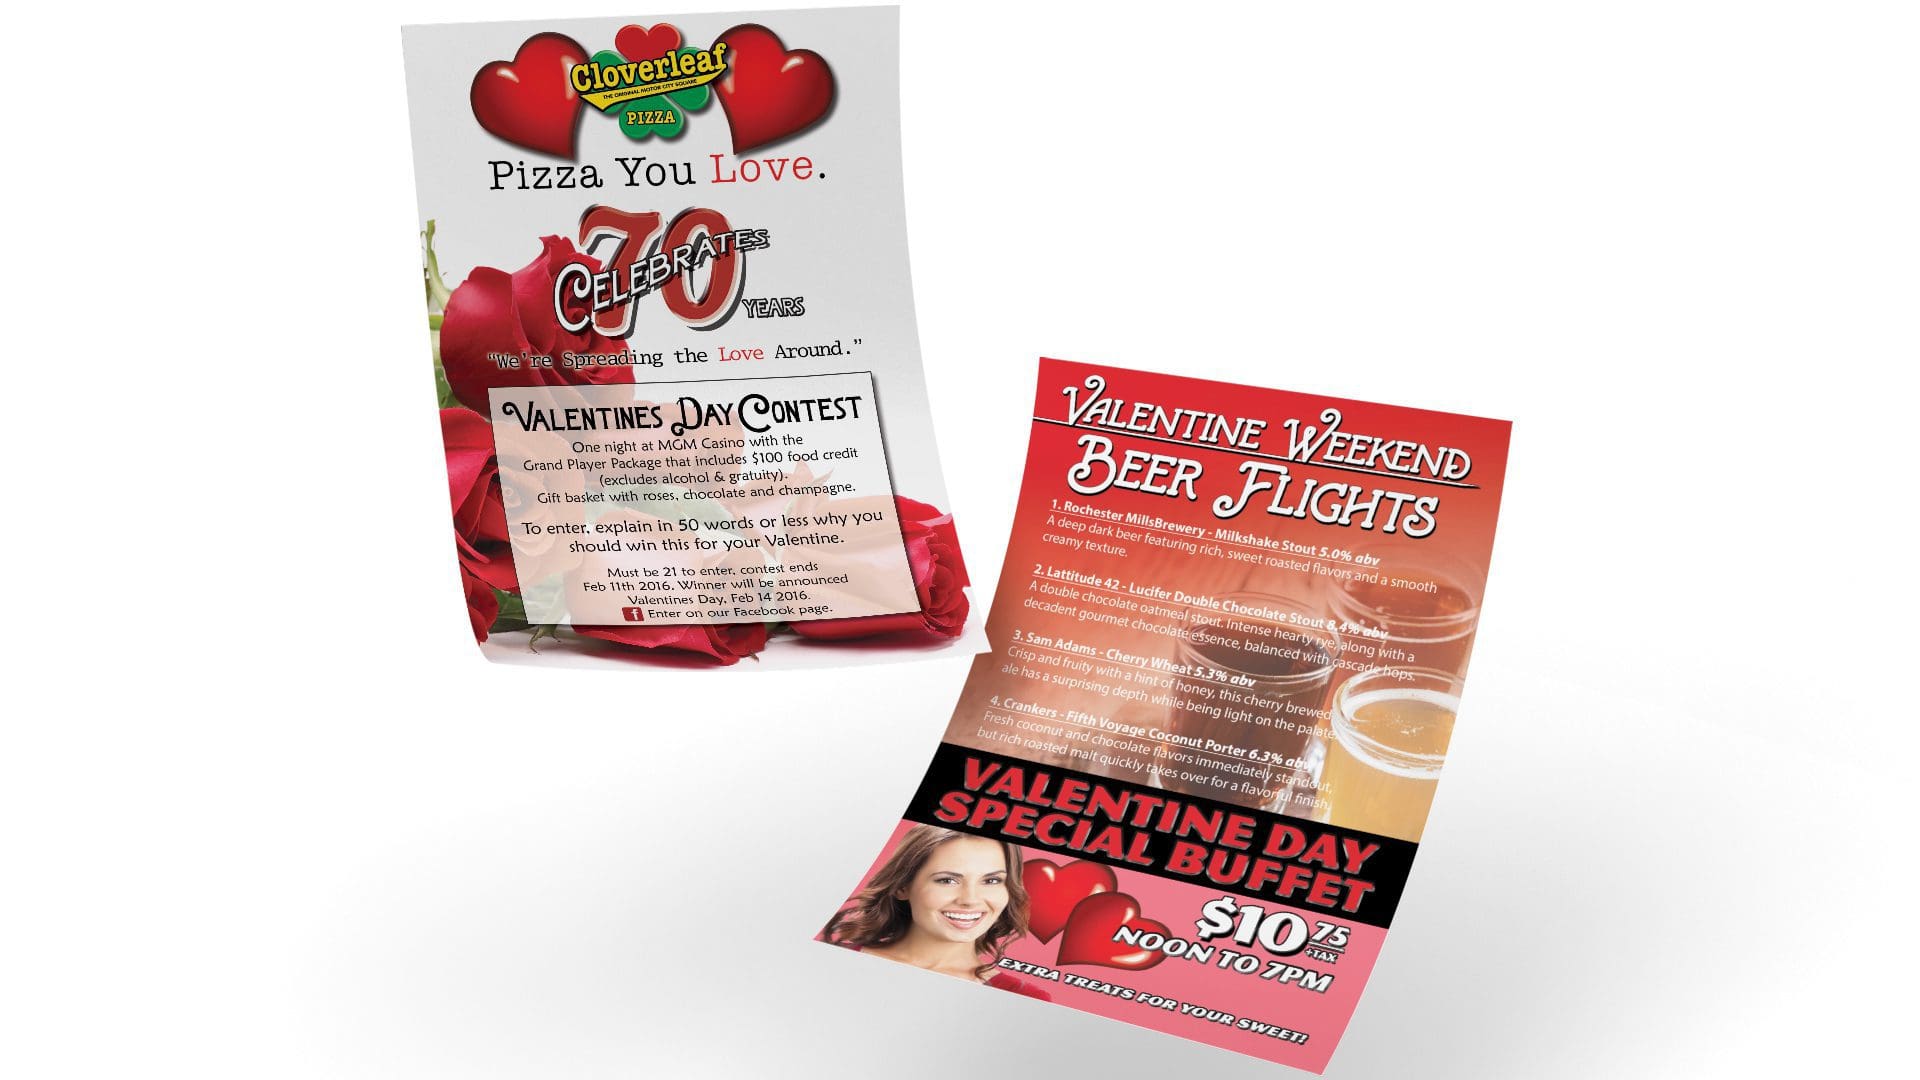 Pizza Promotional Flyer (1)